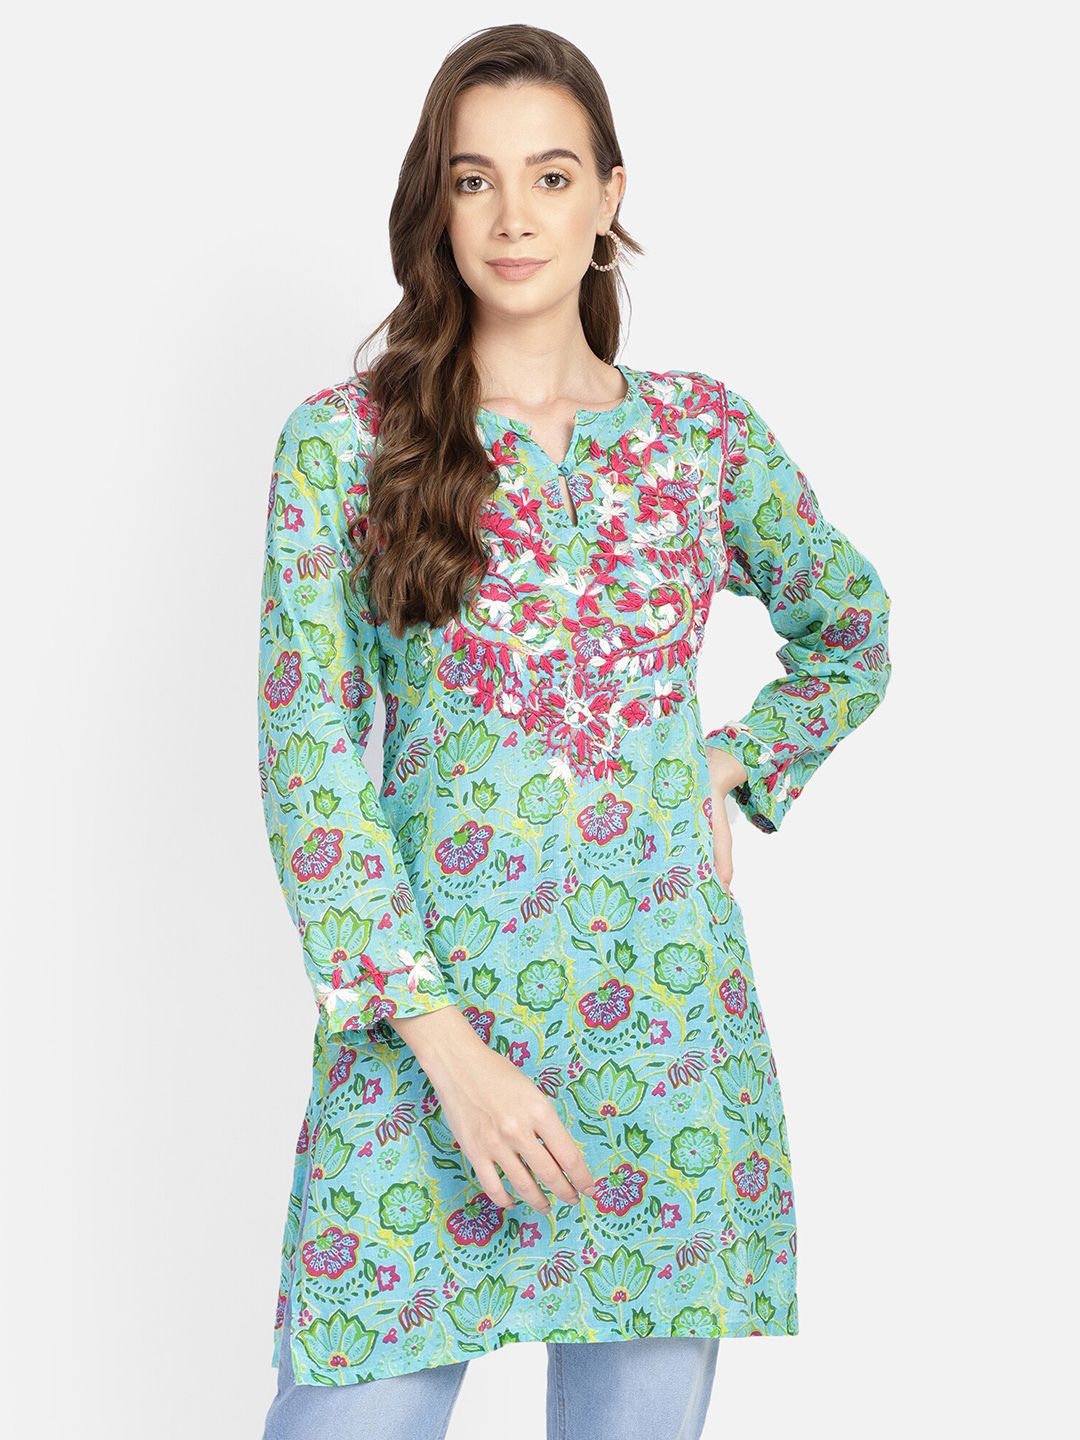 Aditi Wasan Women Turquoise Blue & Pink Floral Hand Embroidered Tunic Price in India